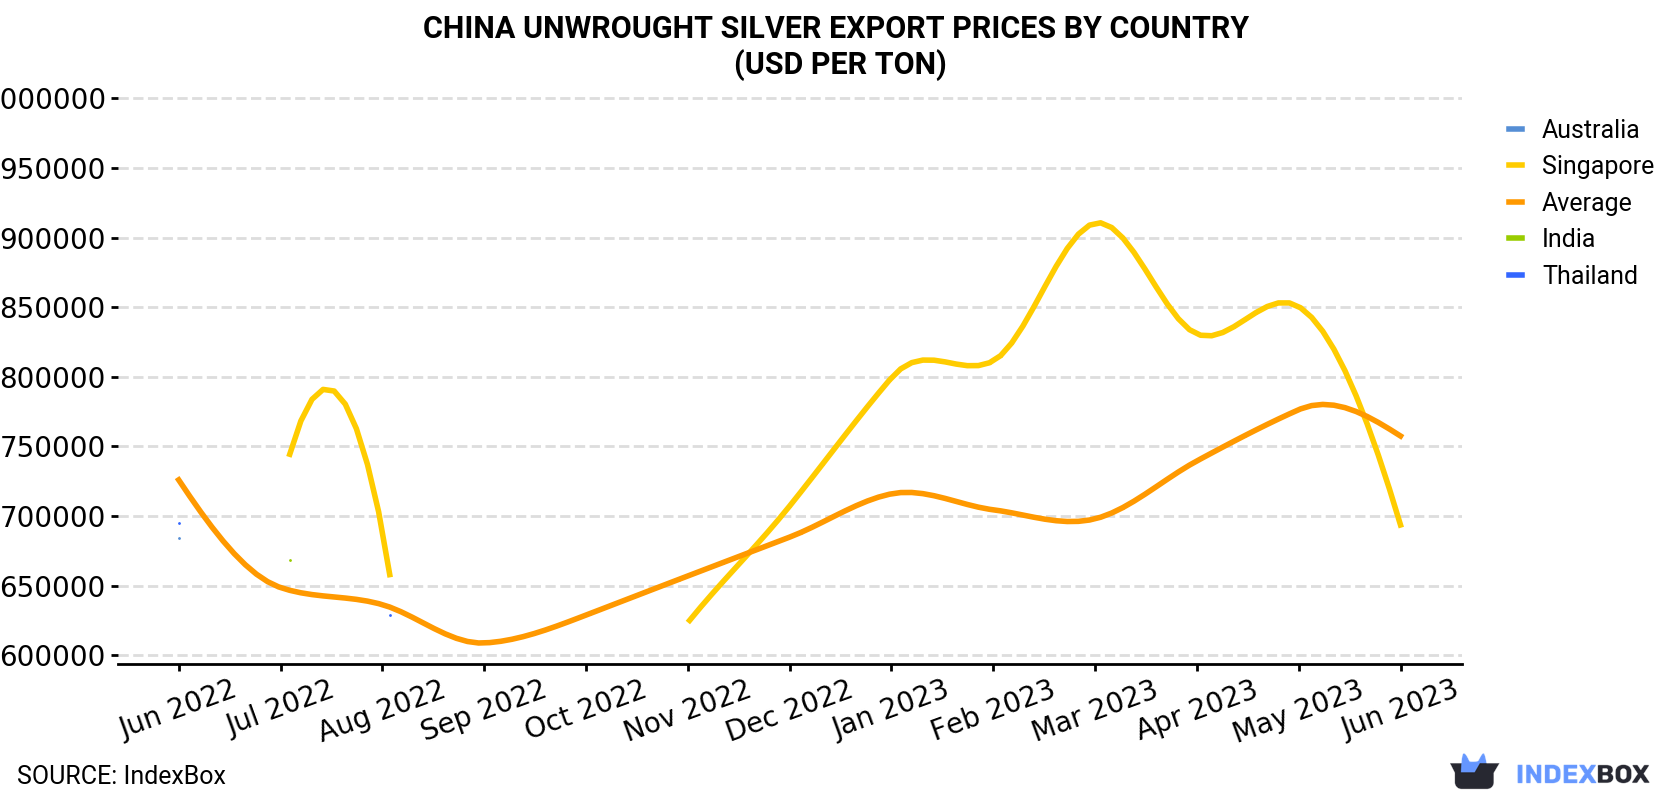 China Unwrought Silver Export Prices By Country (USD Per Ton)